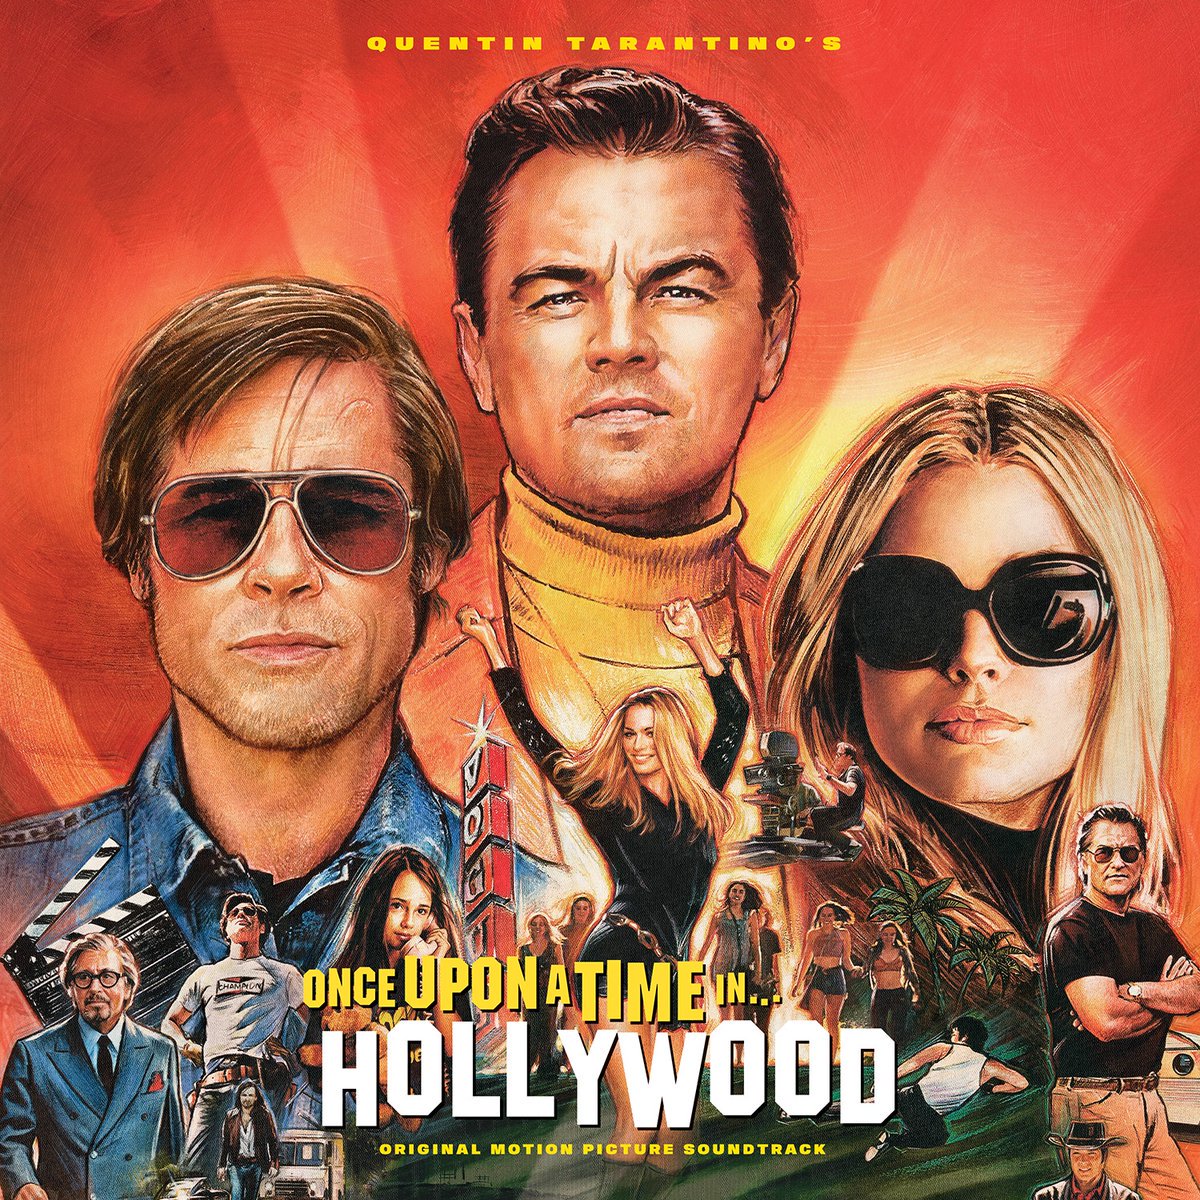 ‘Once Upon A Time In Hollywood’ Review: Tarantino’s Visceral Meditation On Hollywood’s Golden Age